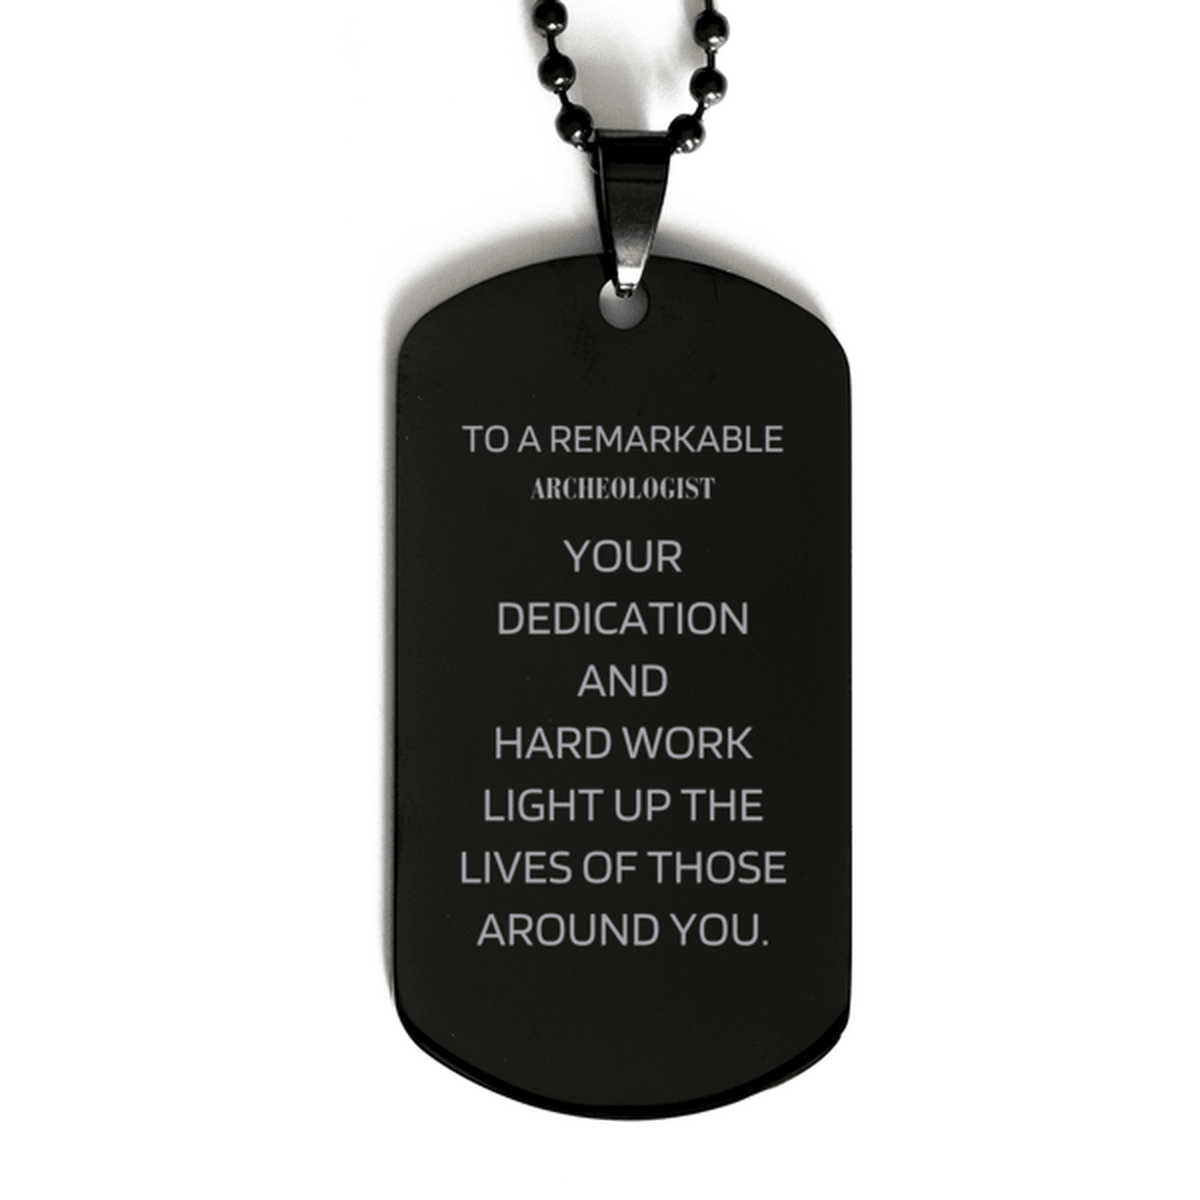 Remarkable Archeologist Gifts, Your dedication and hard work, Inspirational Birthday Christmas Unique Black Dog Tag For Archeologist, Coworkers, Men, Women, Friends - Mallard Moon Gift Shop